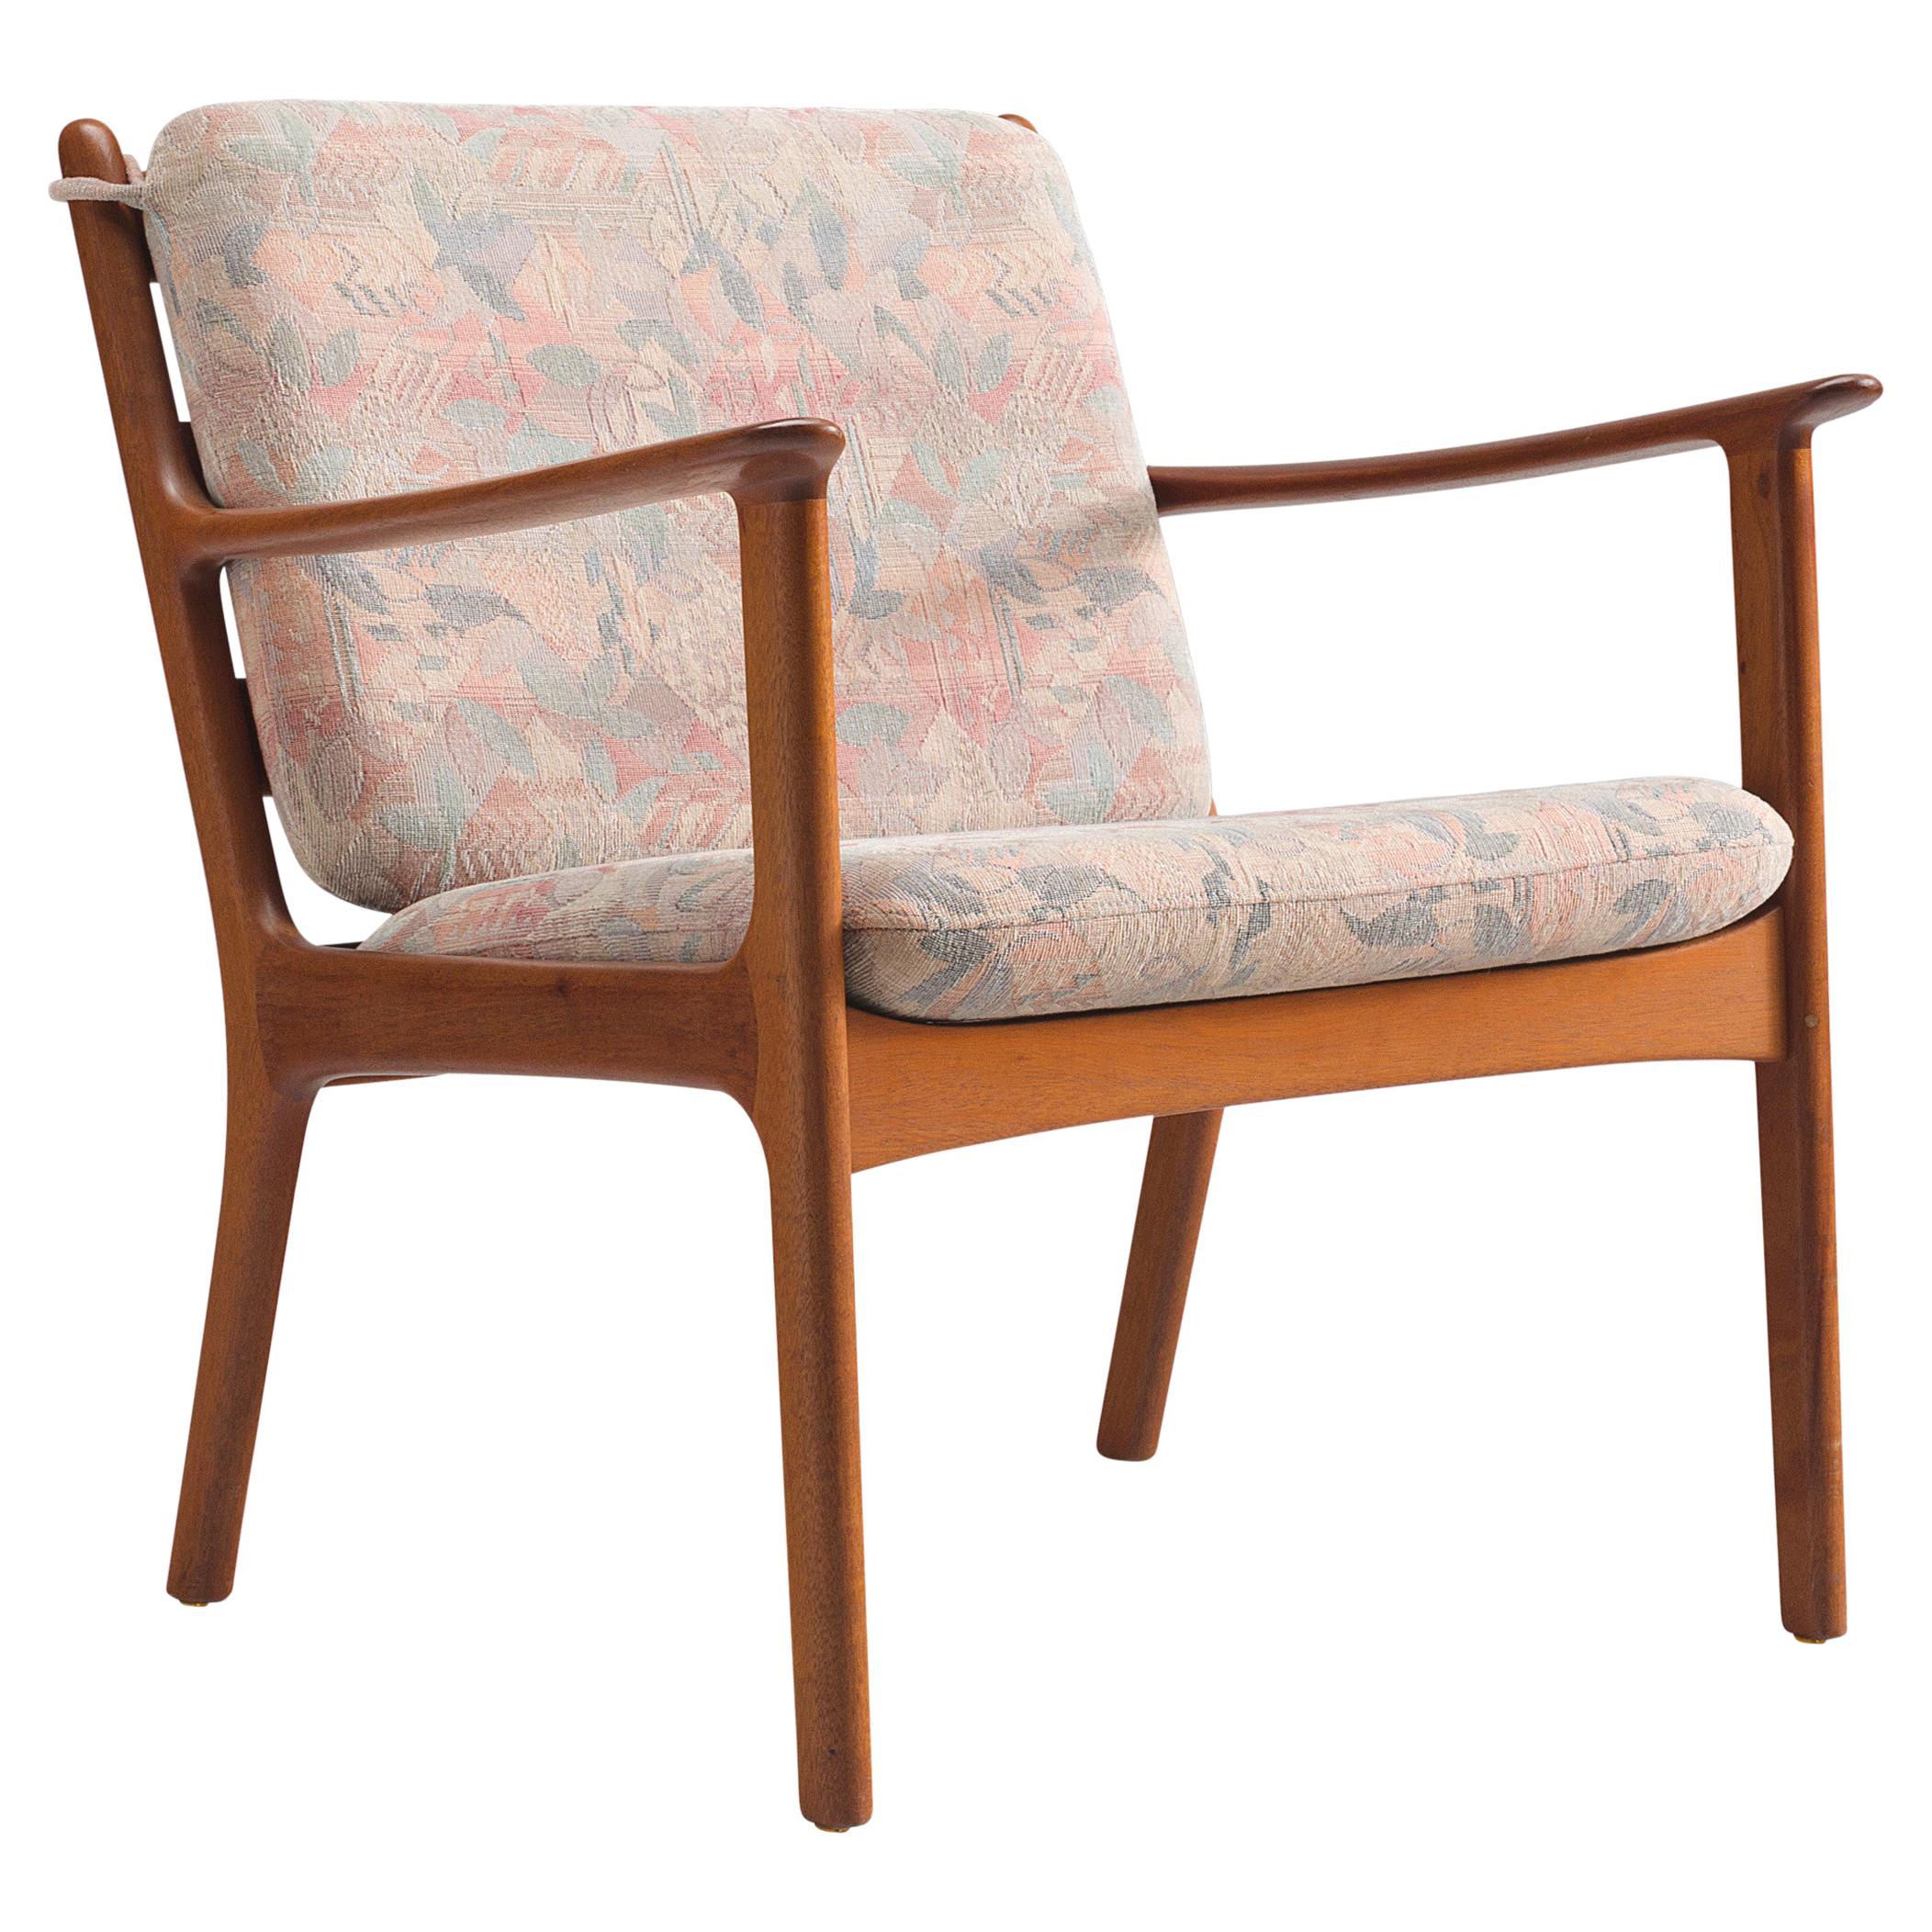 Ole Wanscher Lounge Chair in Mahogany